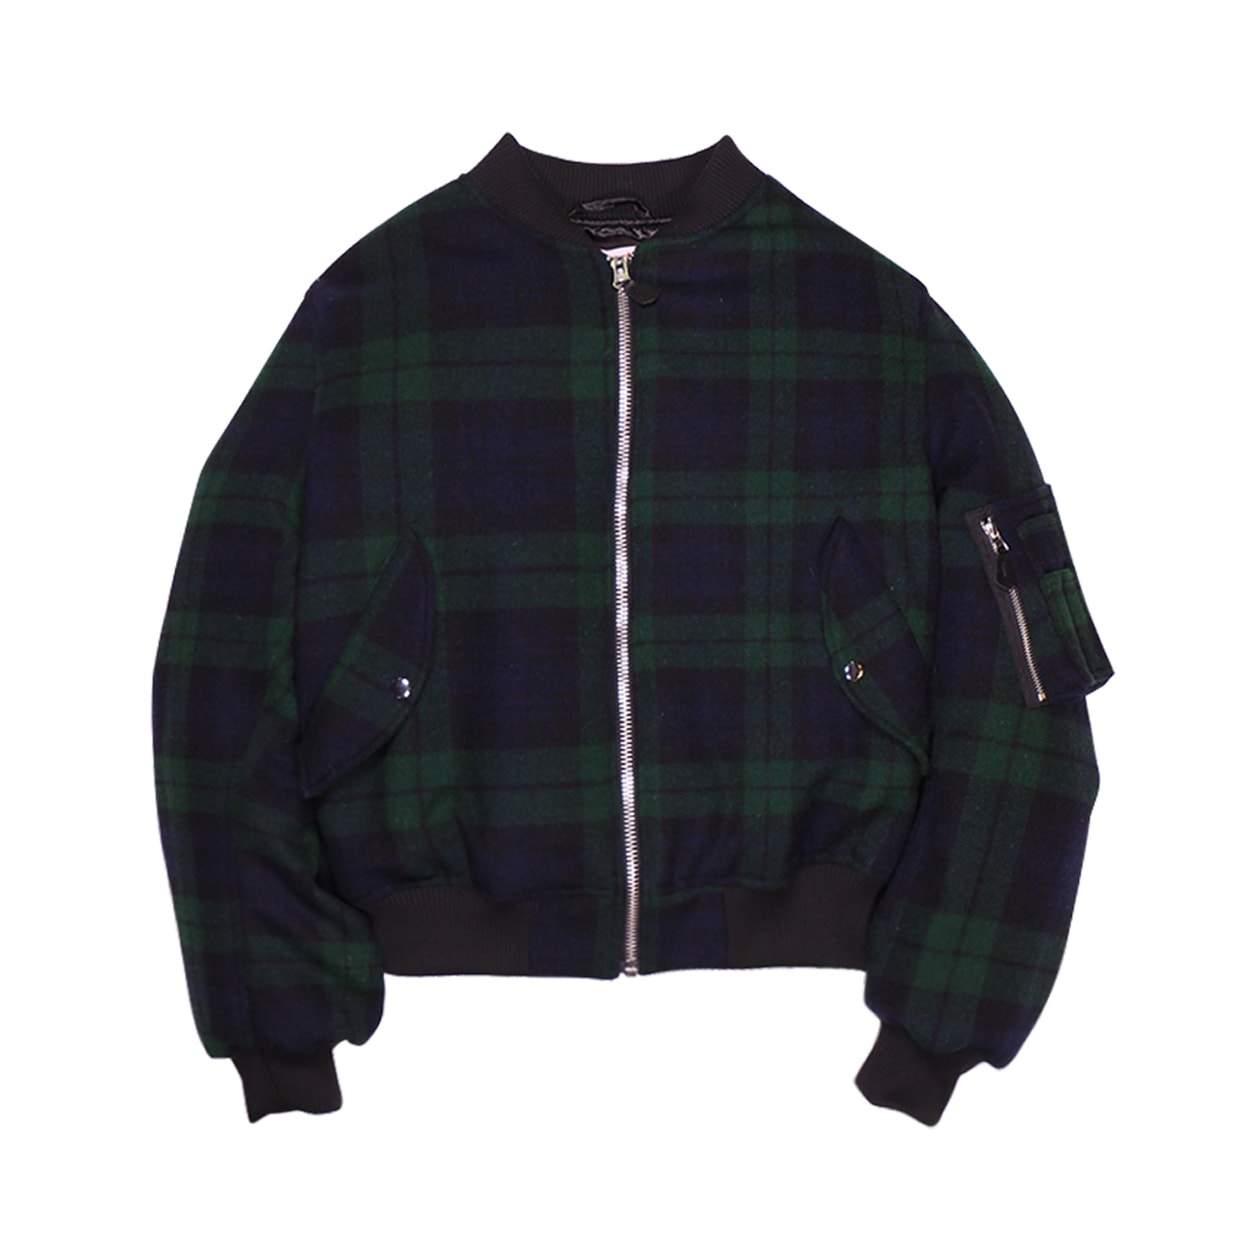 Richardson x UNUSED による初のコラボアイテムが登場 Richardson x UNUSED Winter 2020 Tartan Collaboration collection fall fw20 release date info buy website store shop japan designer